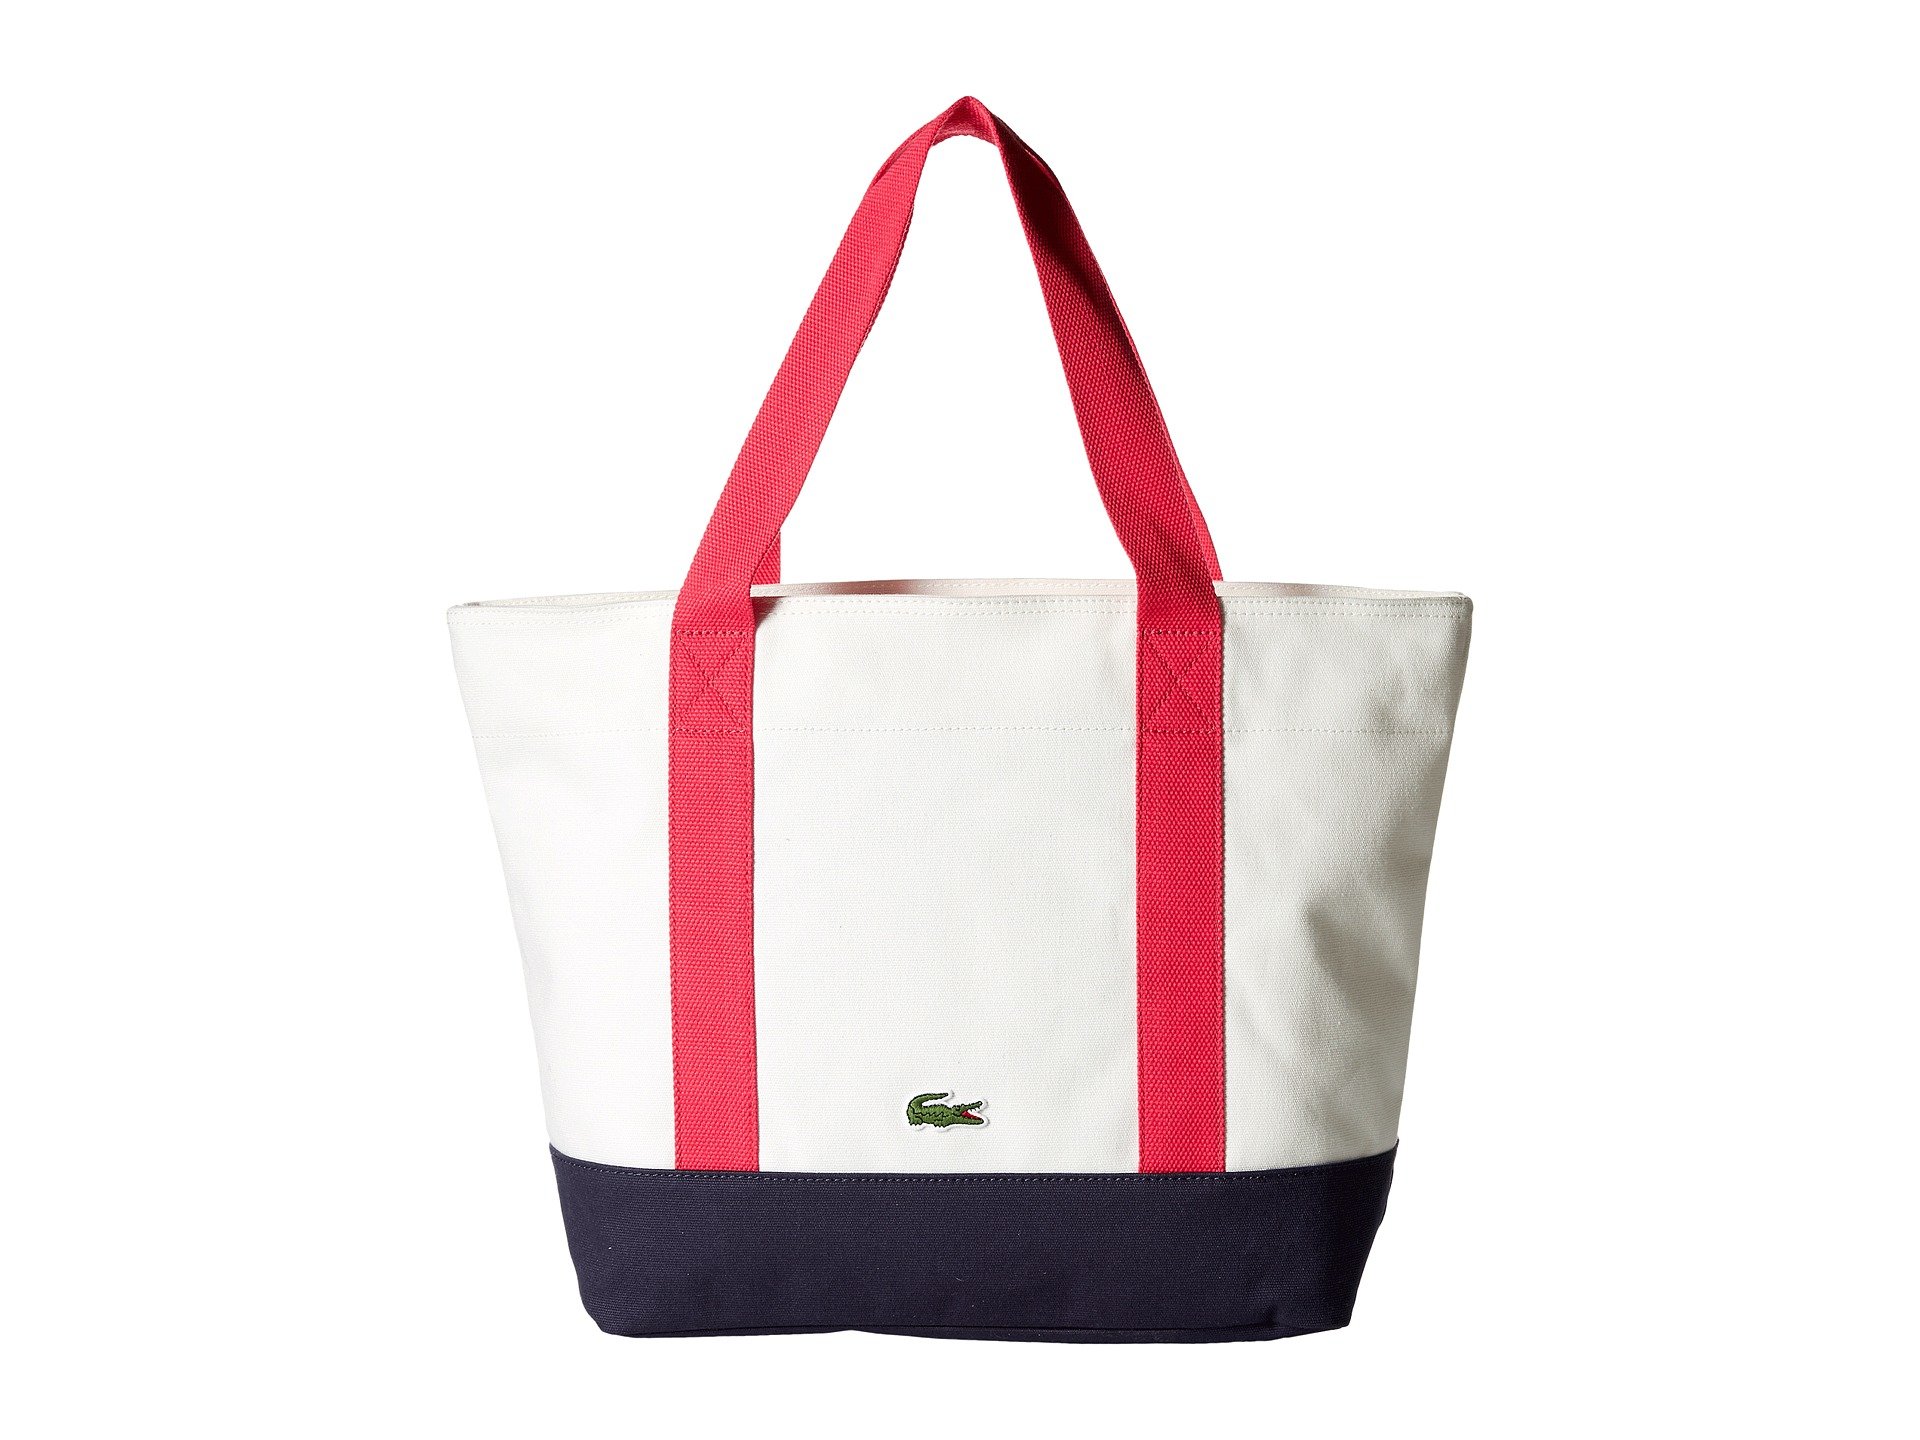 Lacoste Cotton Medium Shopping Bag in White - Lyst